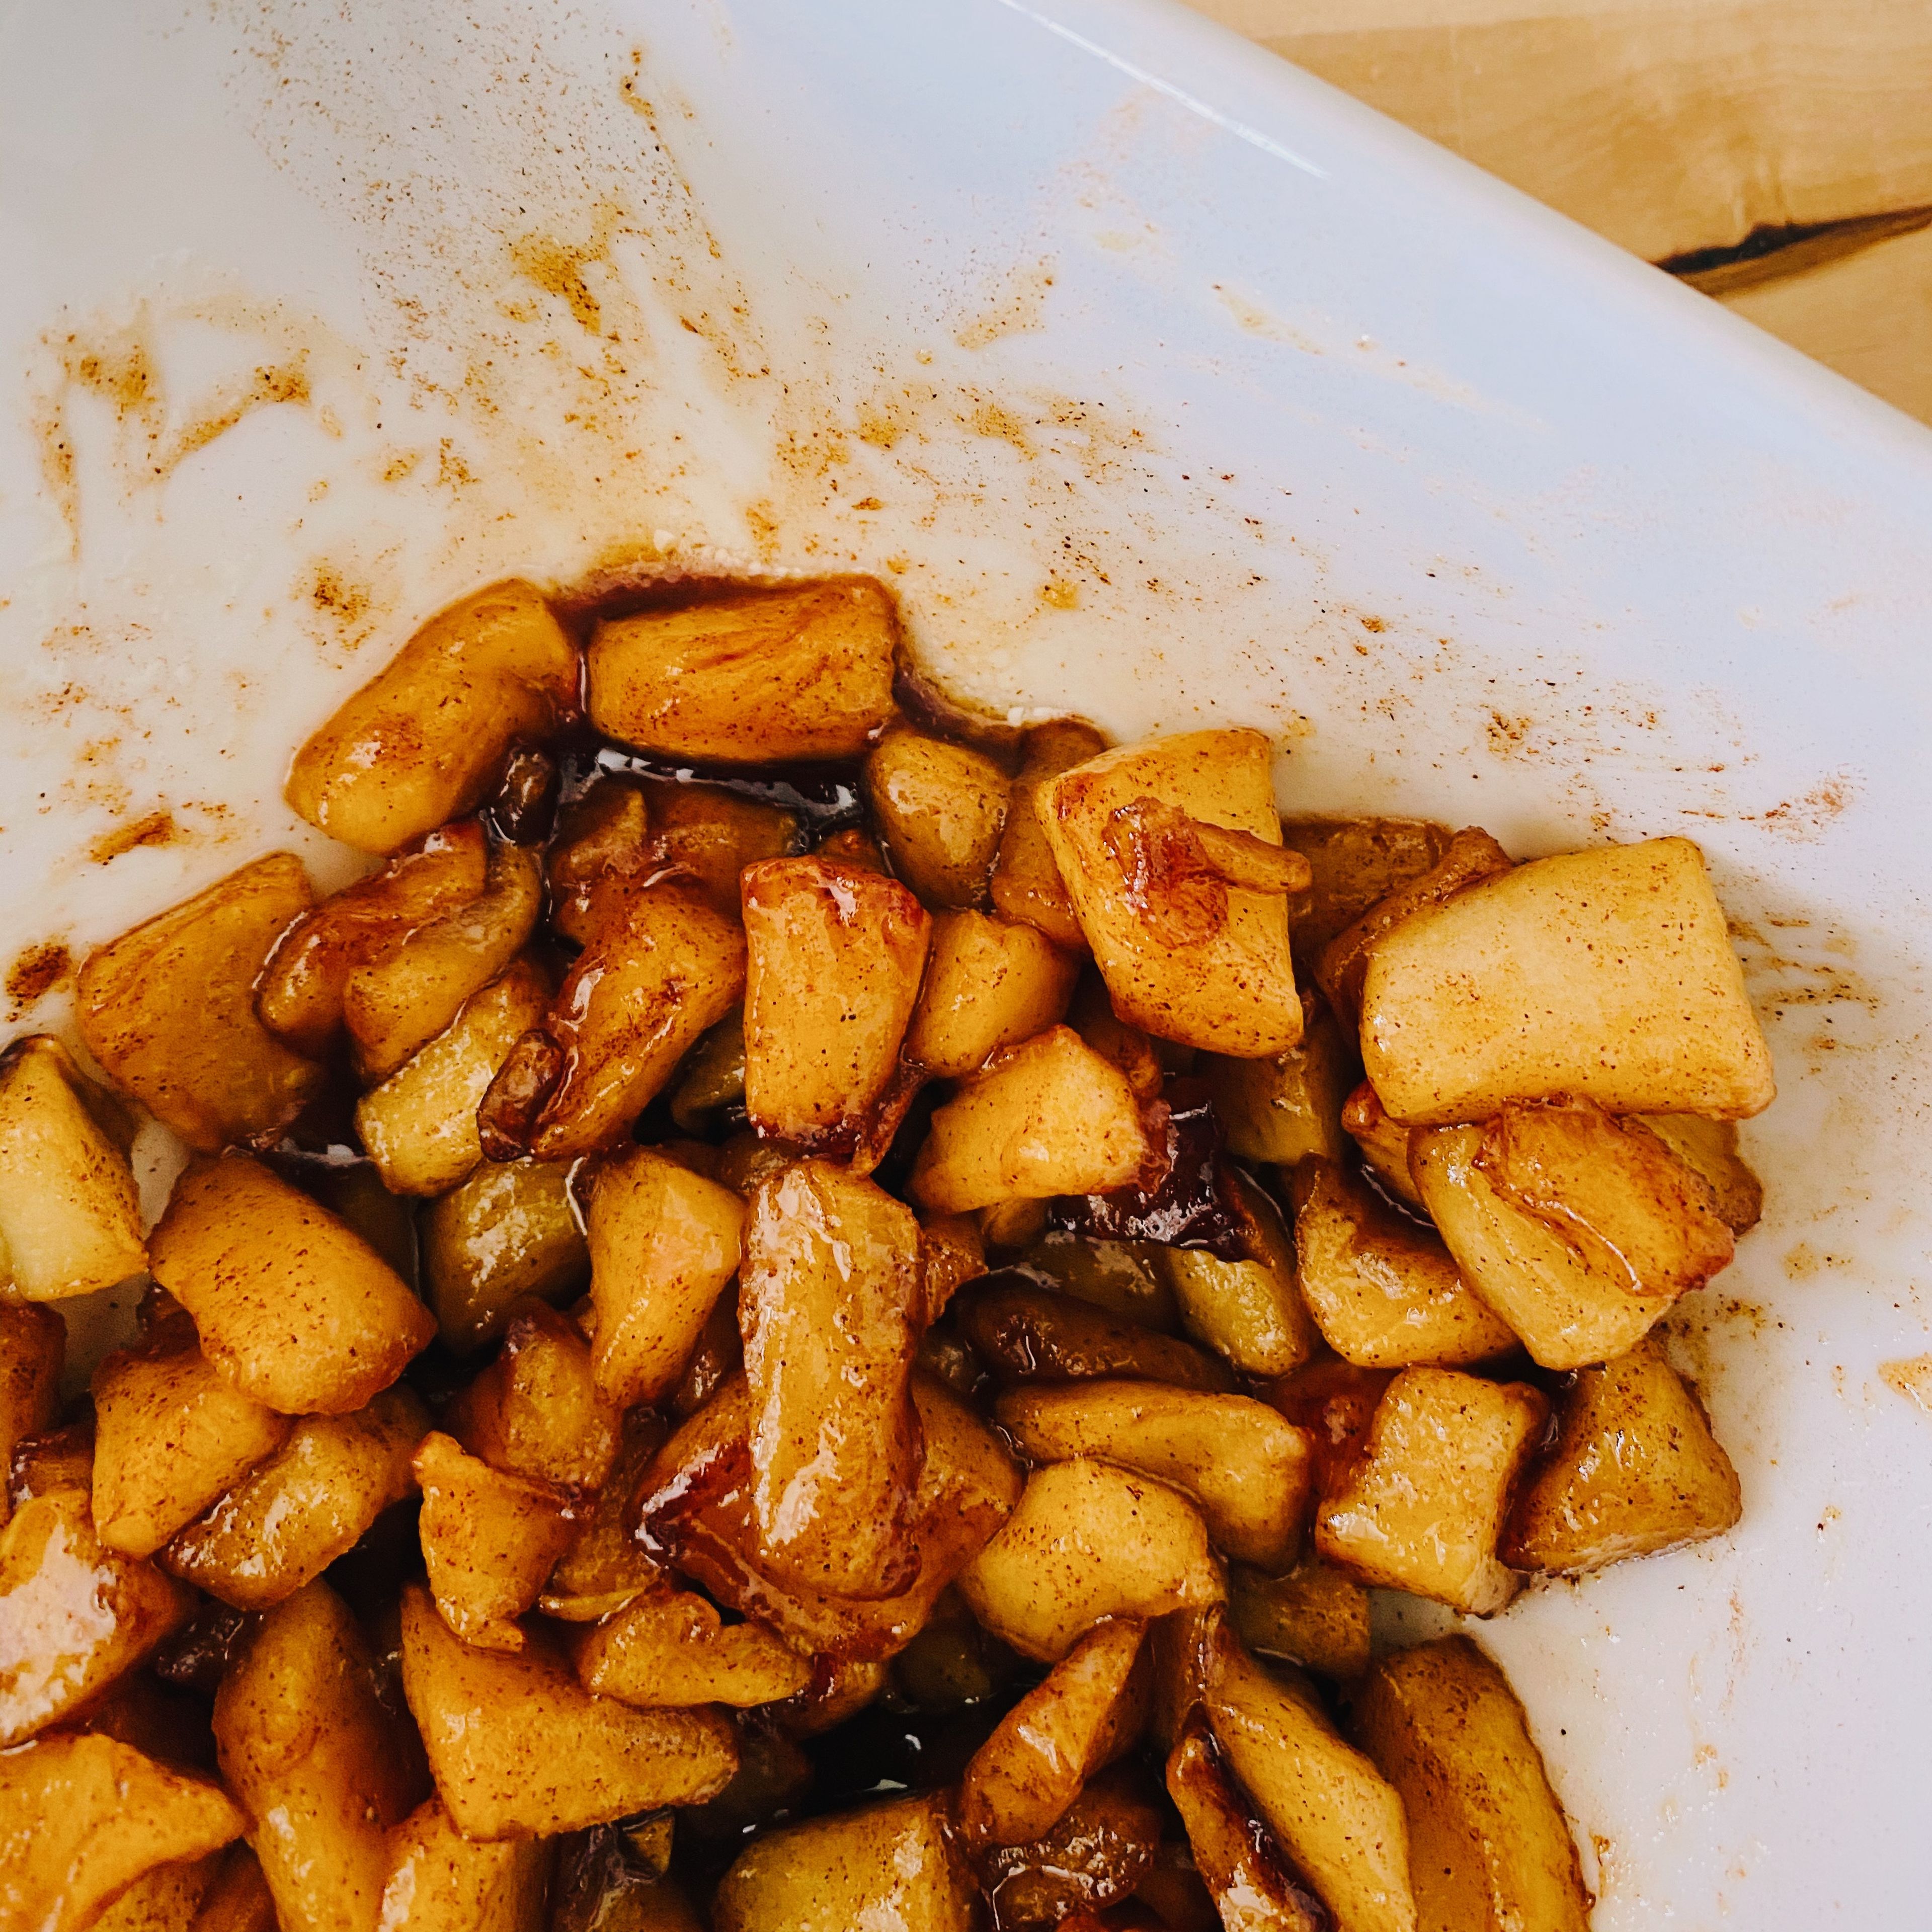 Peel and cut your apples into cubes. Add butter to your pan and preheat to medium high heat. Once the pan is hot add your apples, 1 spoon of sugar, cinnamon, nutmeg and a spoon of water. Cook until nicely caramelised, around 15minutes.